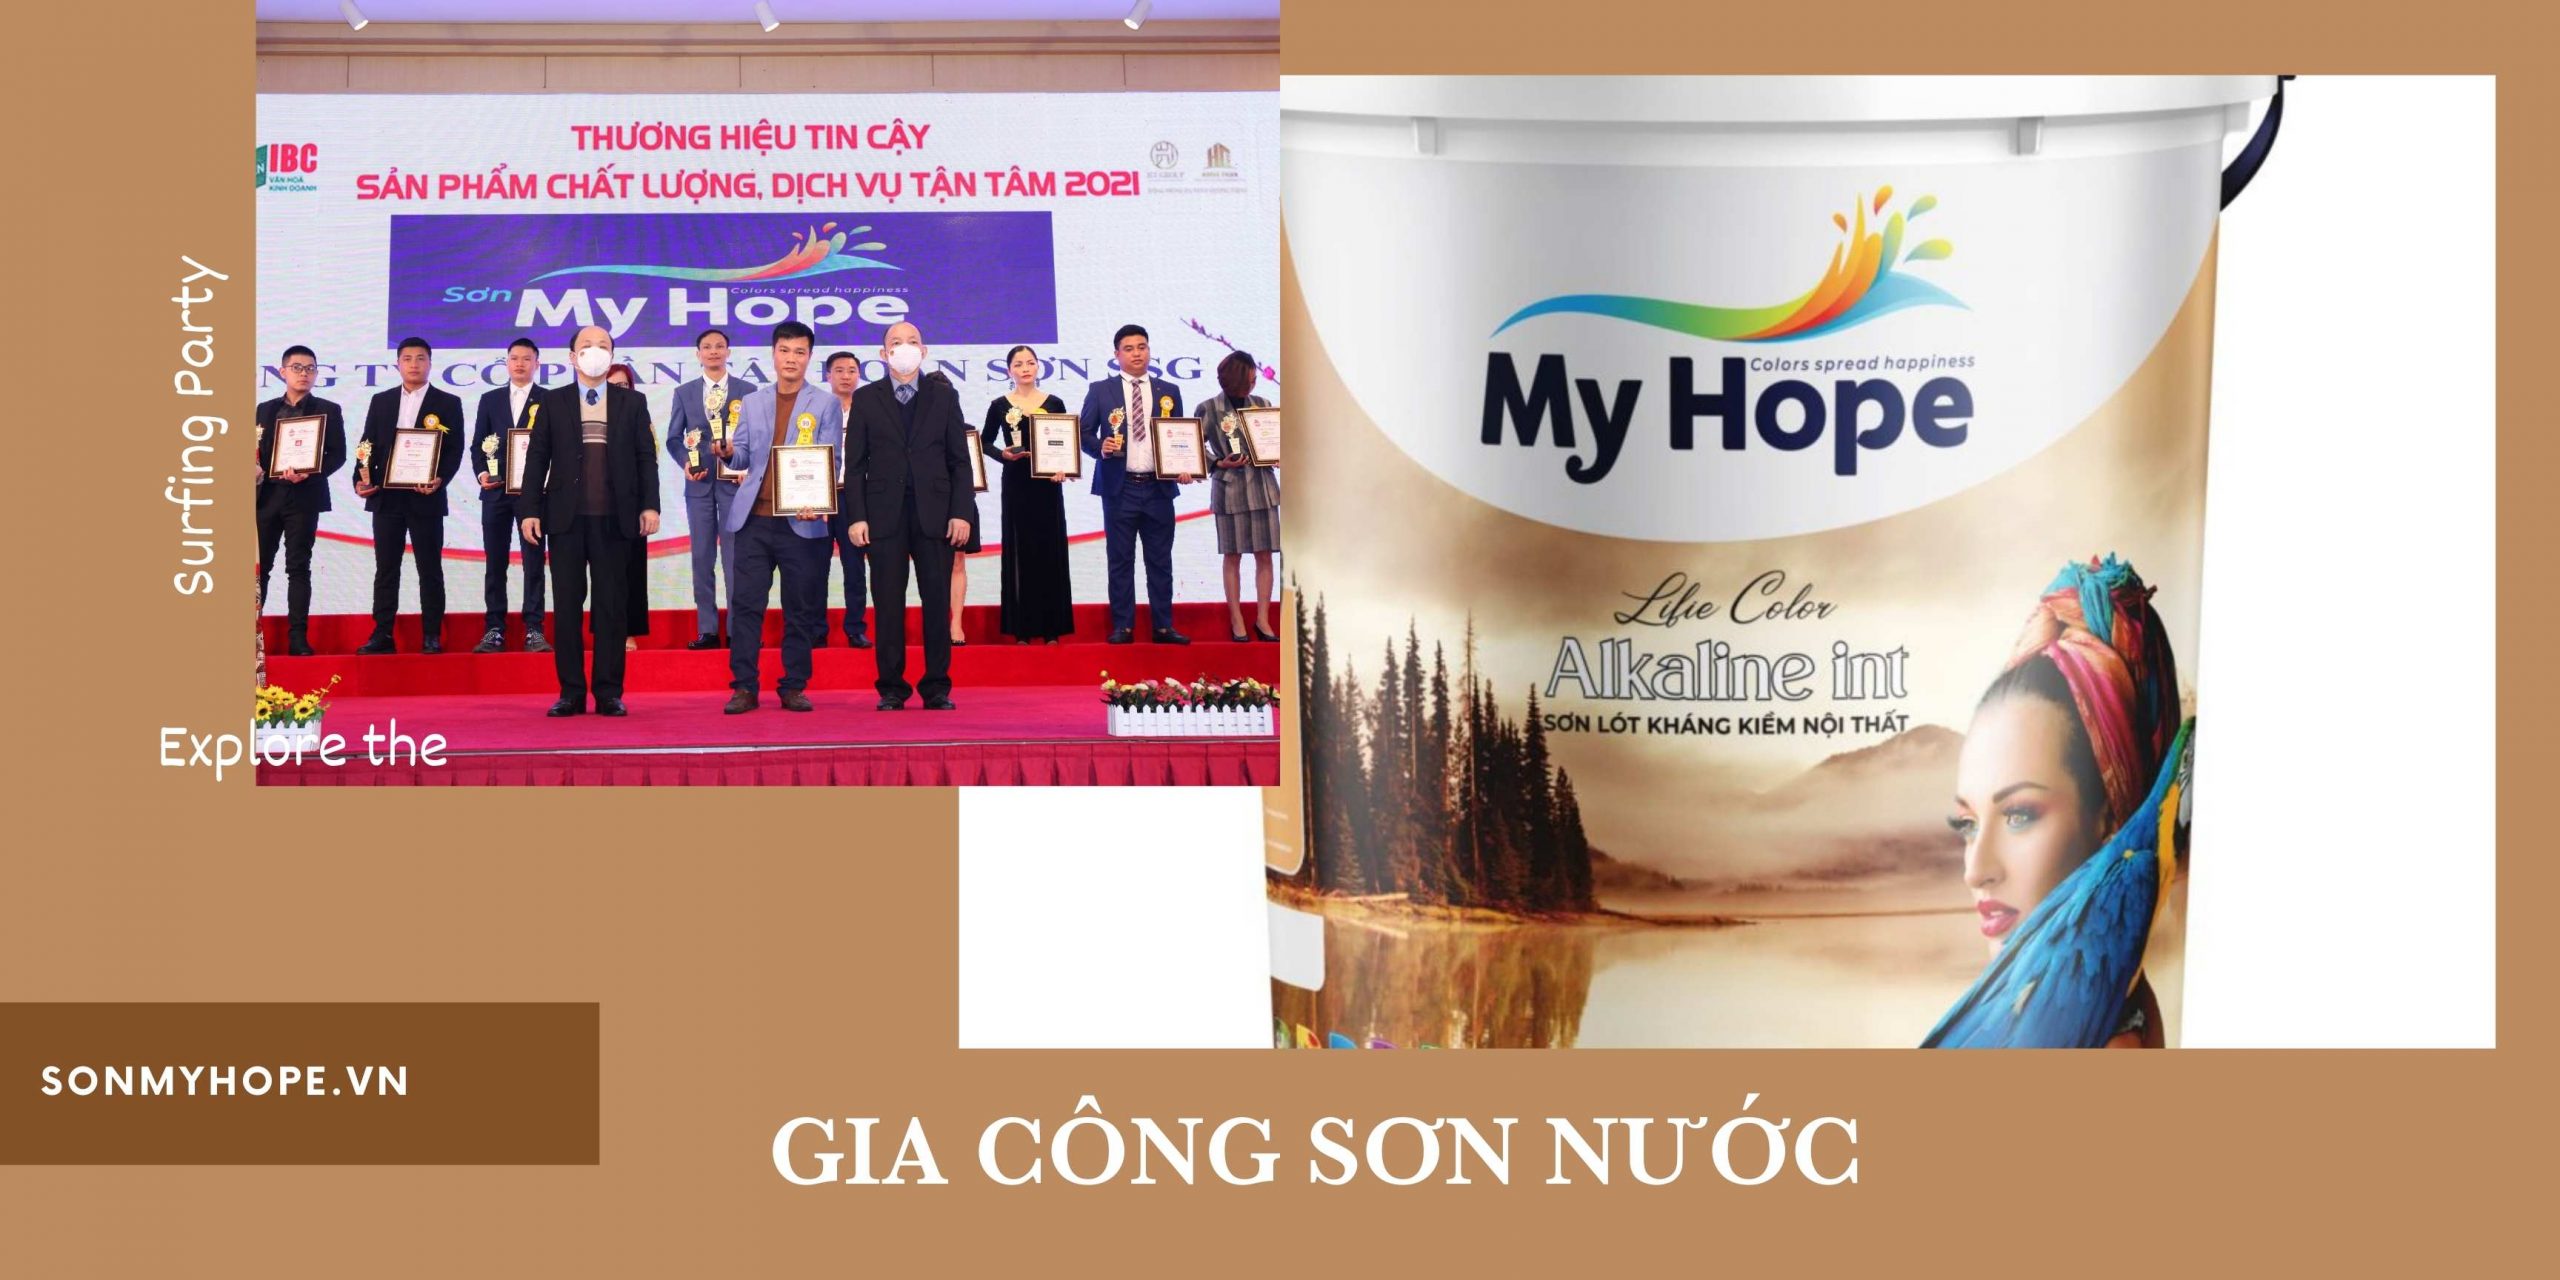 GIA CONG SON NUOC scaled